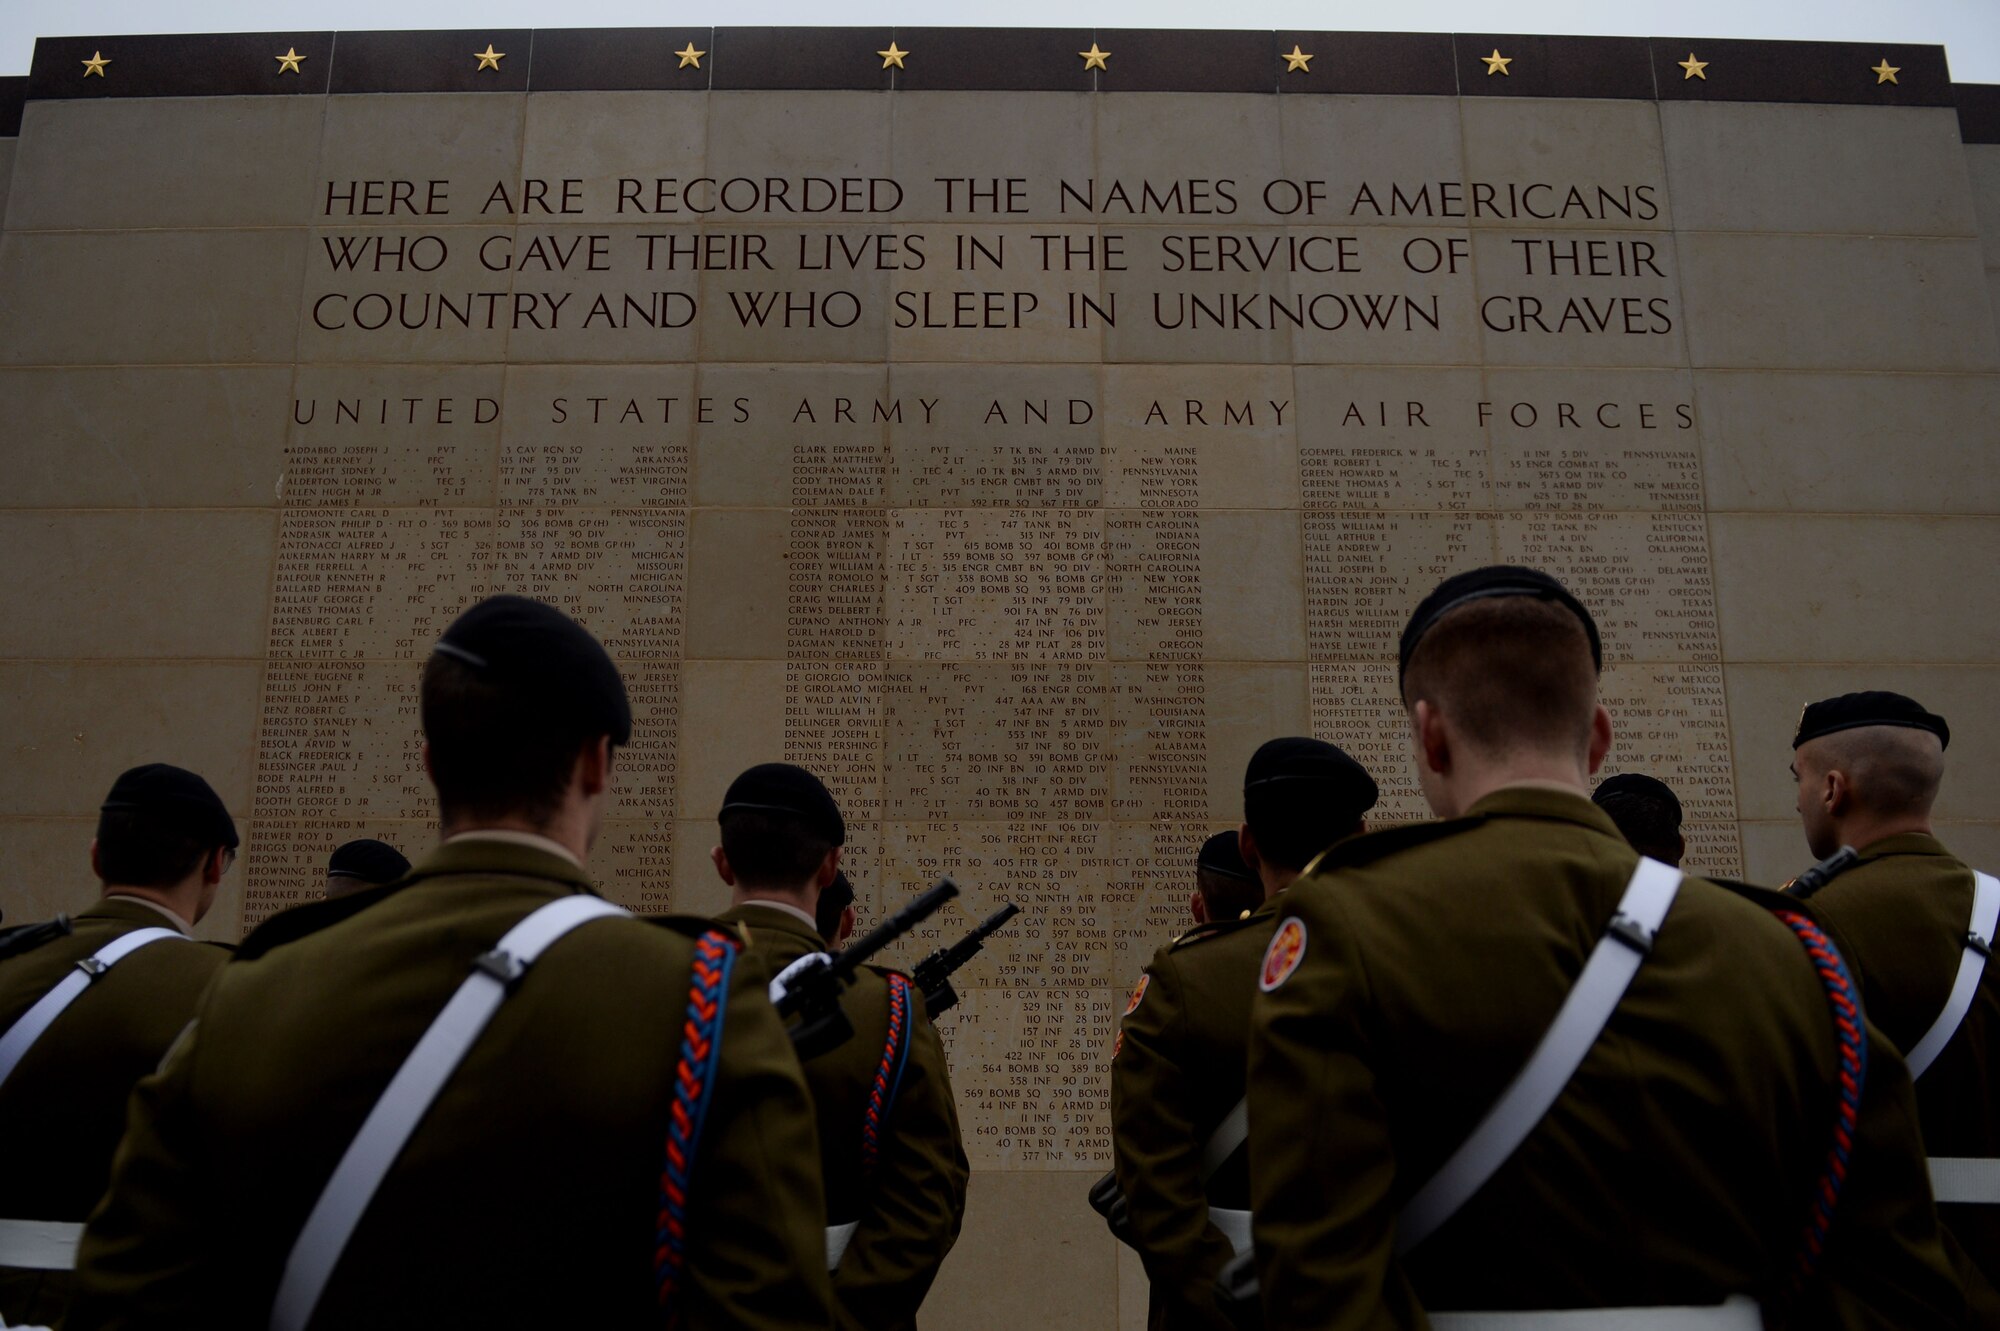 Luxembourg Army soldiers stand in formation in front of a wall commemorating fallen American service members before the Battle of the Bulge 70th Anniversary ceremony at the Luxembourg American Military Cemetery in Luxembourg, Dec. 16, 2014. The cemetery holds the bodies of 5,076 U.S. service members, 101 of whom are unknown. (U.S. Air Force photo by Airman 1st Class Timothy Kim/Released)